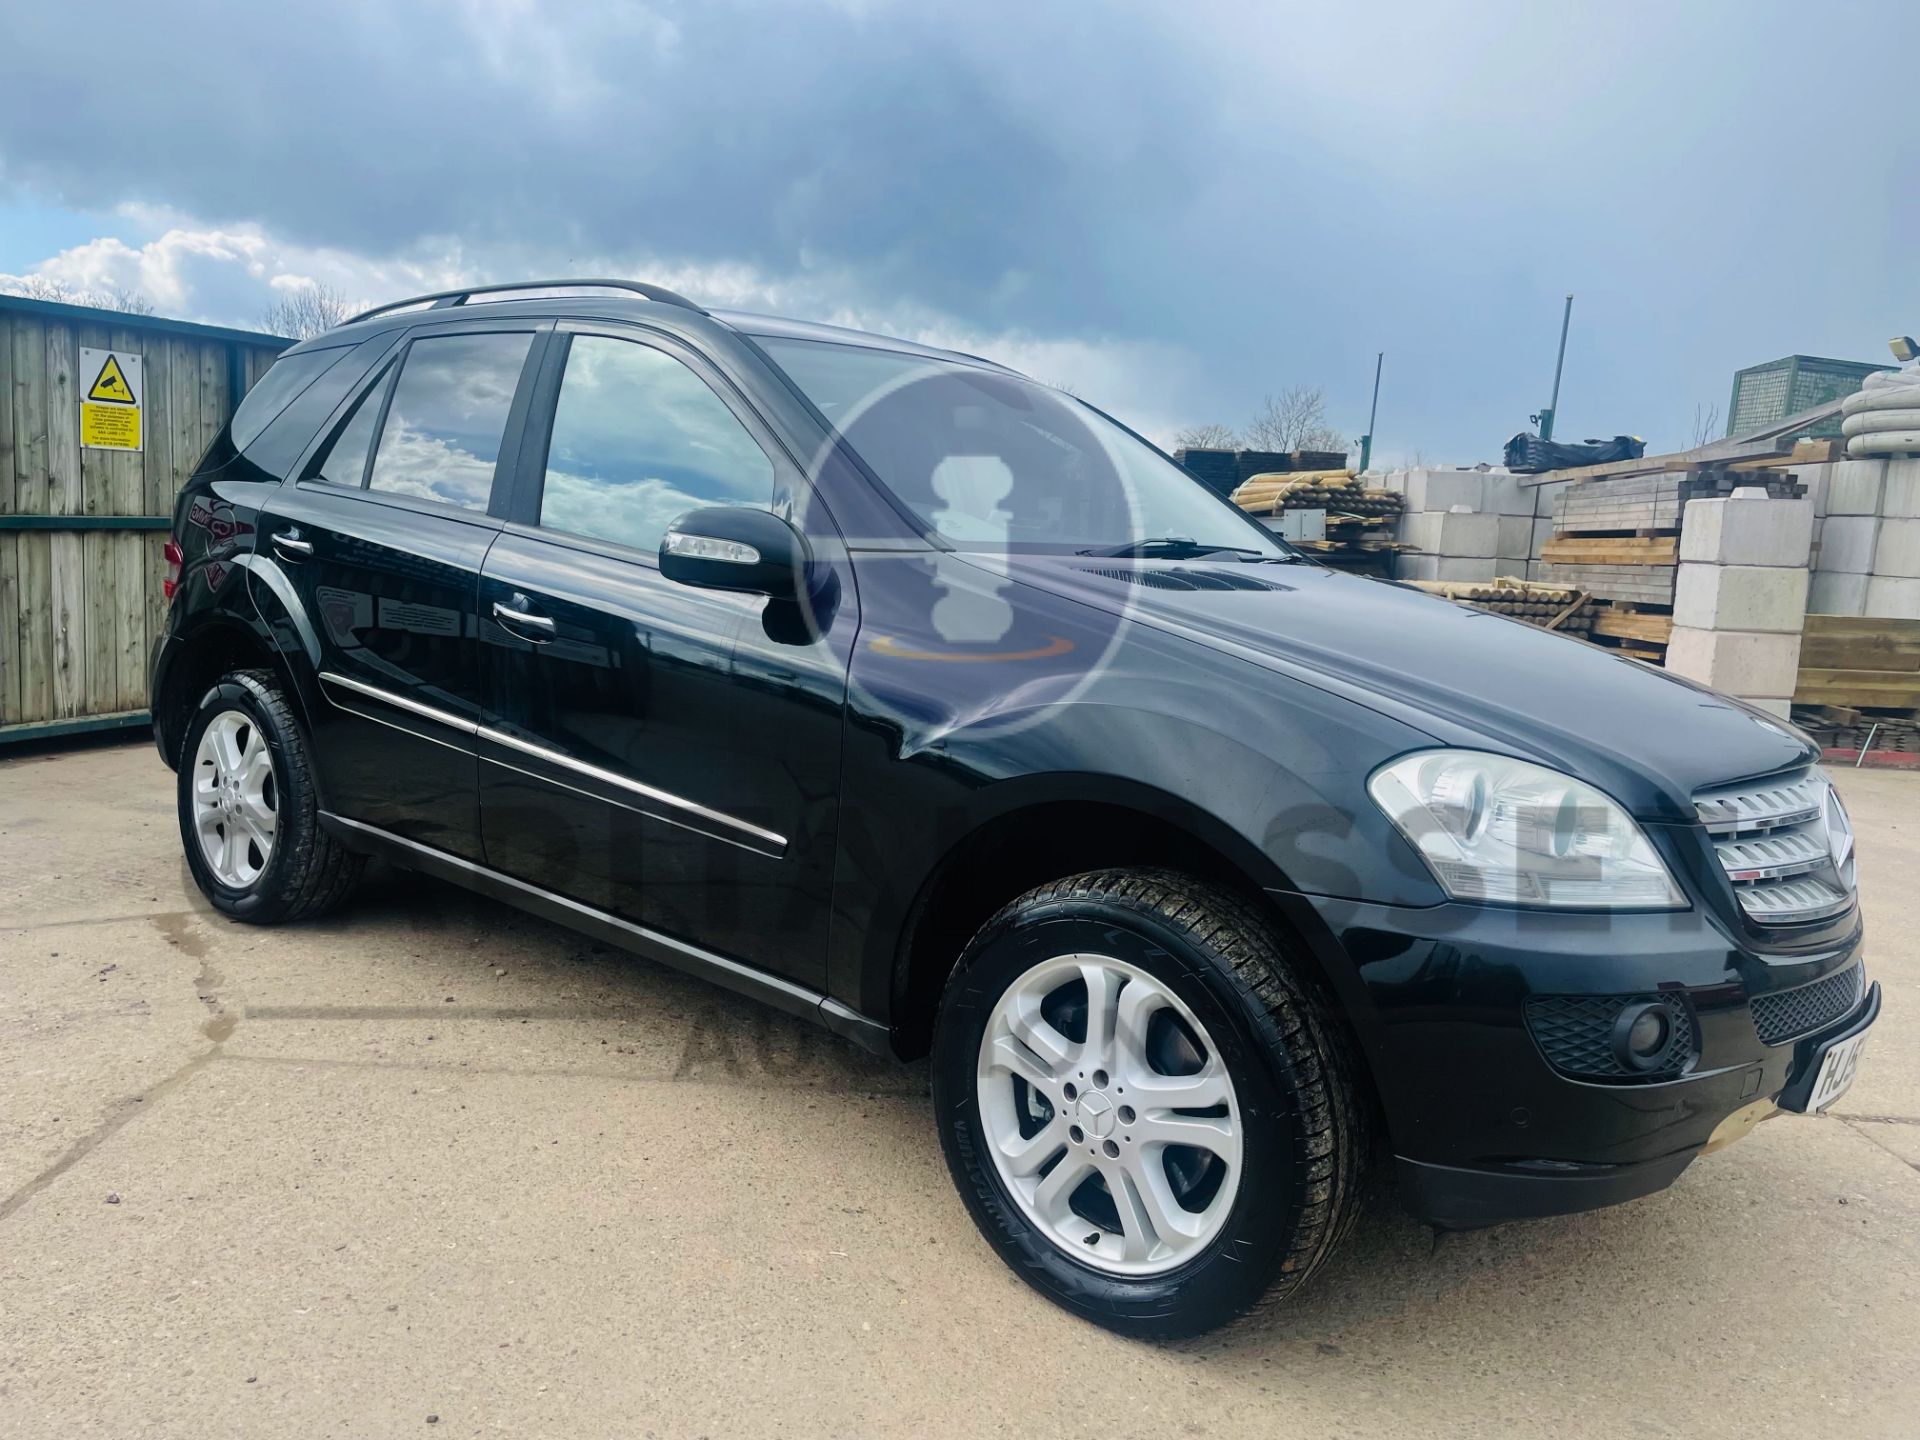 ON SALE MERCEDES-BENZ ML 320 CDI *SE EDITION* SUV (2007 MODEL) '3.0 DIESEL - AUTOMATIC' *LEATHER - Image 3 of 49